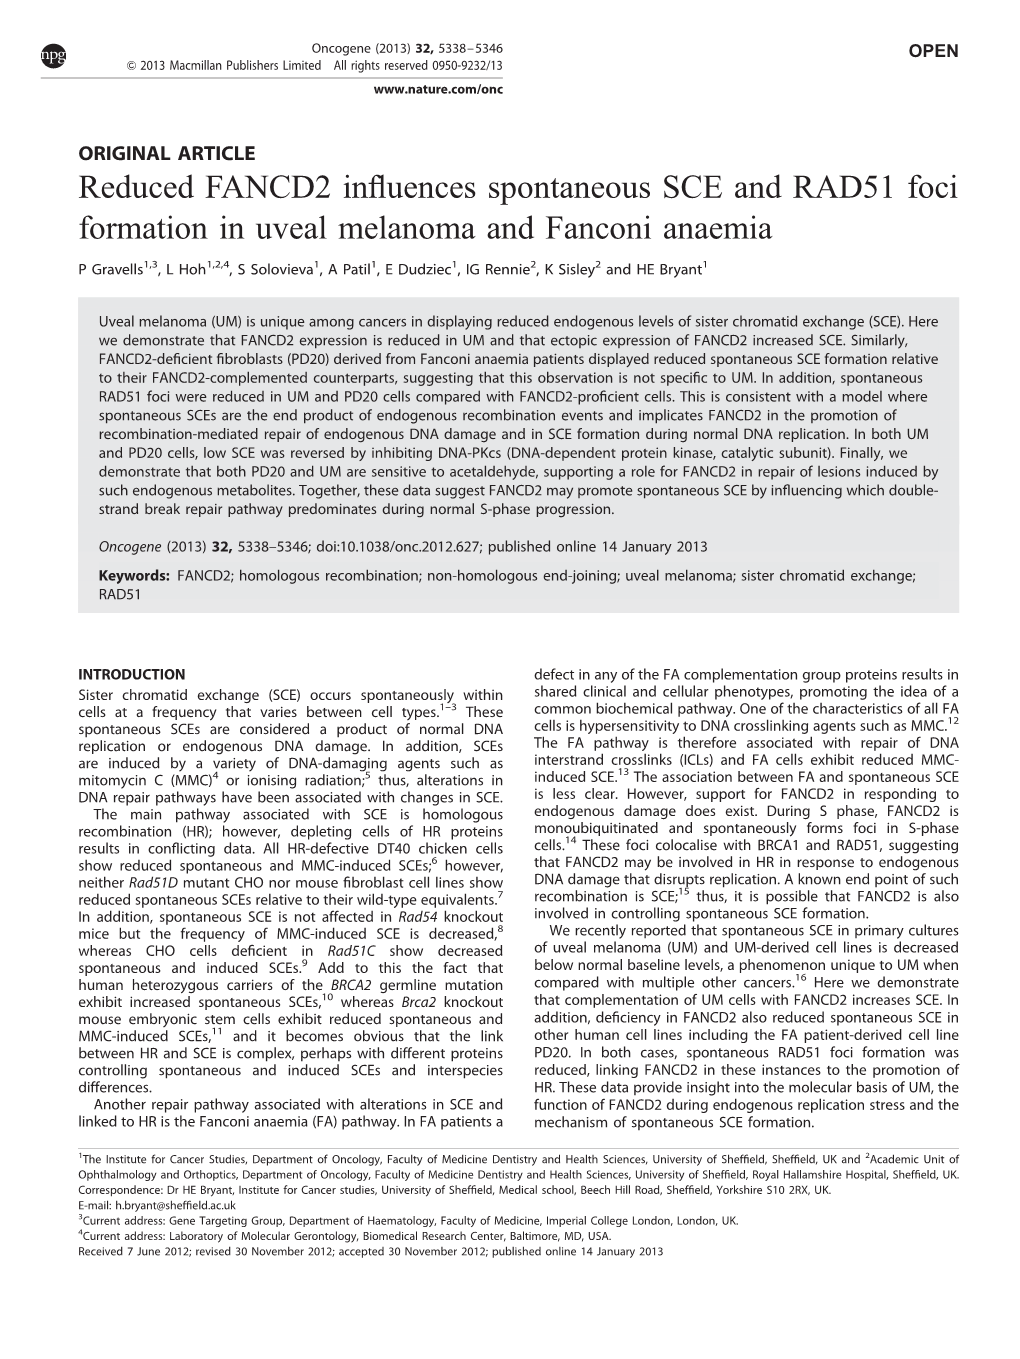 Reduced FANCD2 Influences Spontaneous SCE and RAD51 Foci